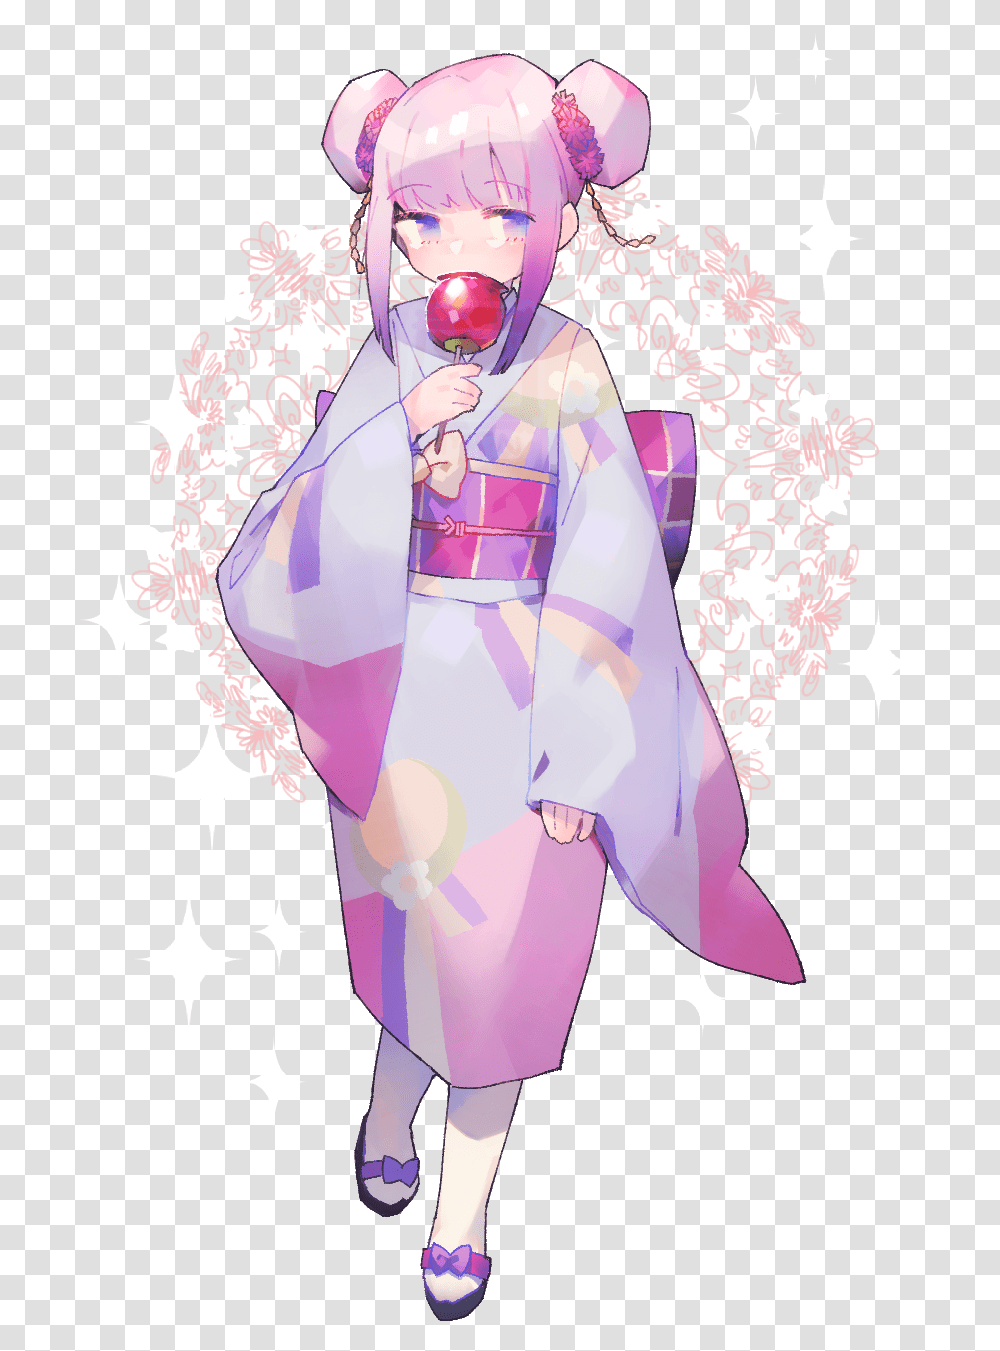 Kanna With A Candy Apple Imgur Illustration, Clothing, Apparel, Robe, Fashion Transparent Png